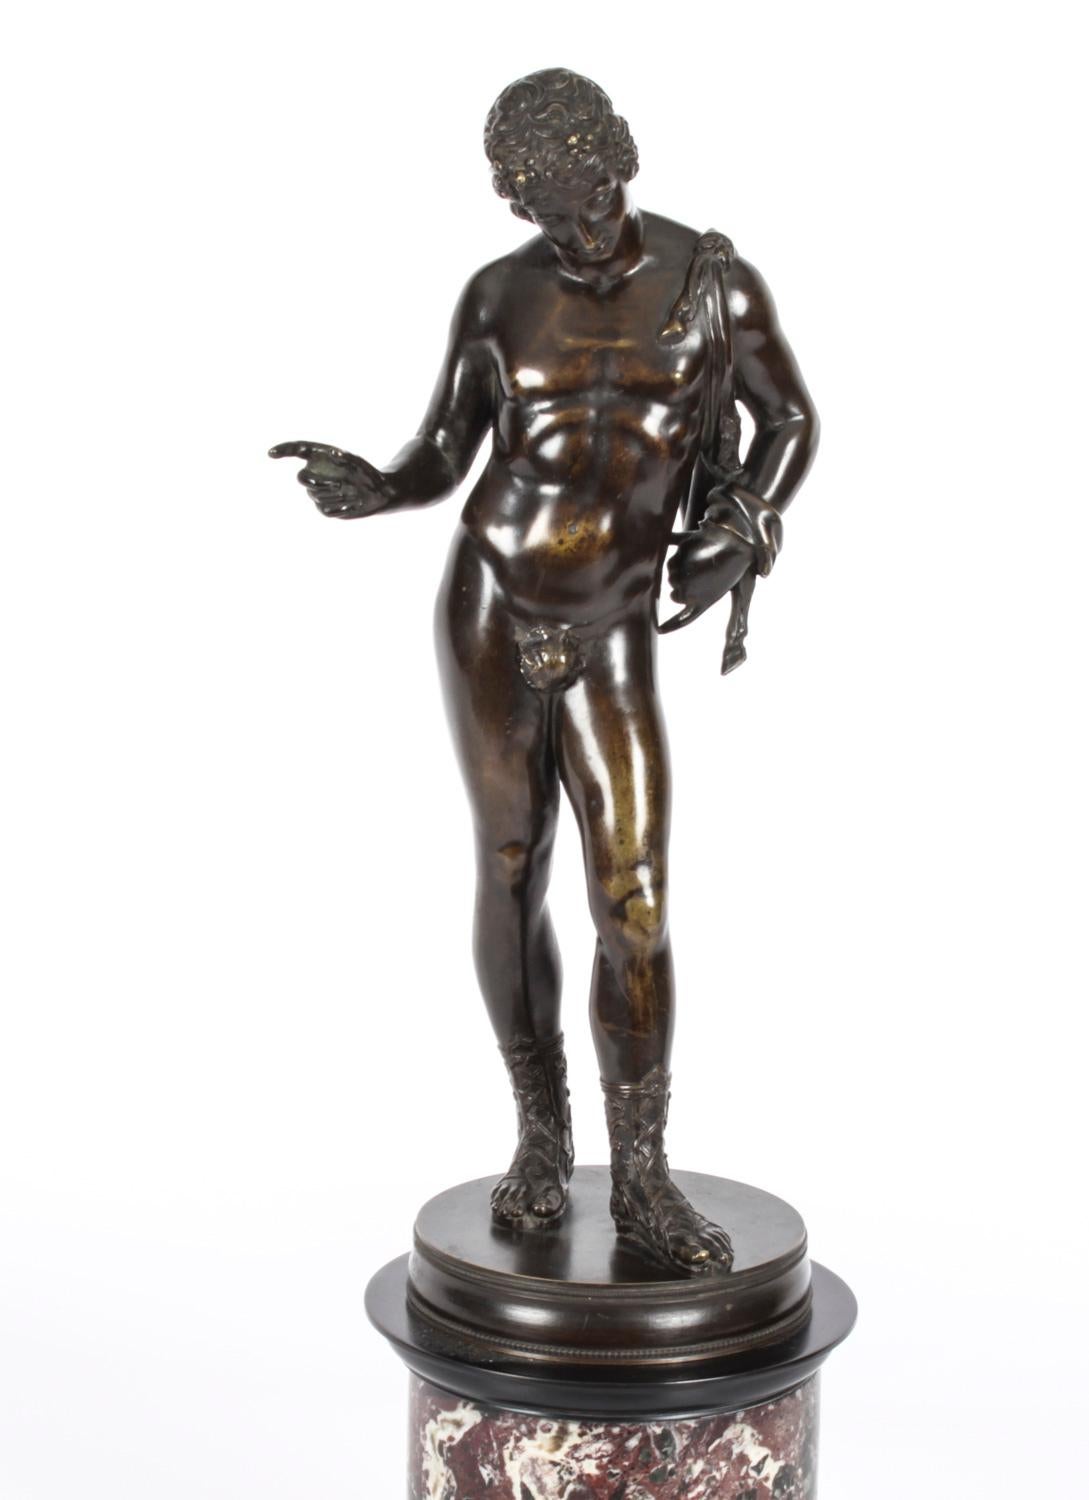 This is a superb large antique Grand Tour patinated bronze version of David, dating from the mid 19th Century.
 
The bronze statue depicts David with an enigmatic smile posed with one foot forward.
The youth is completely naked, apart from boots